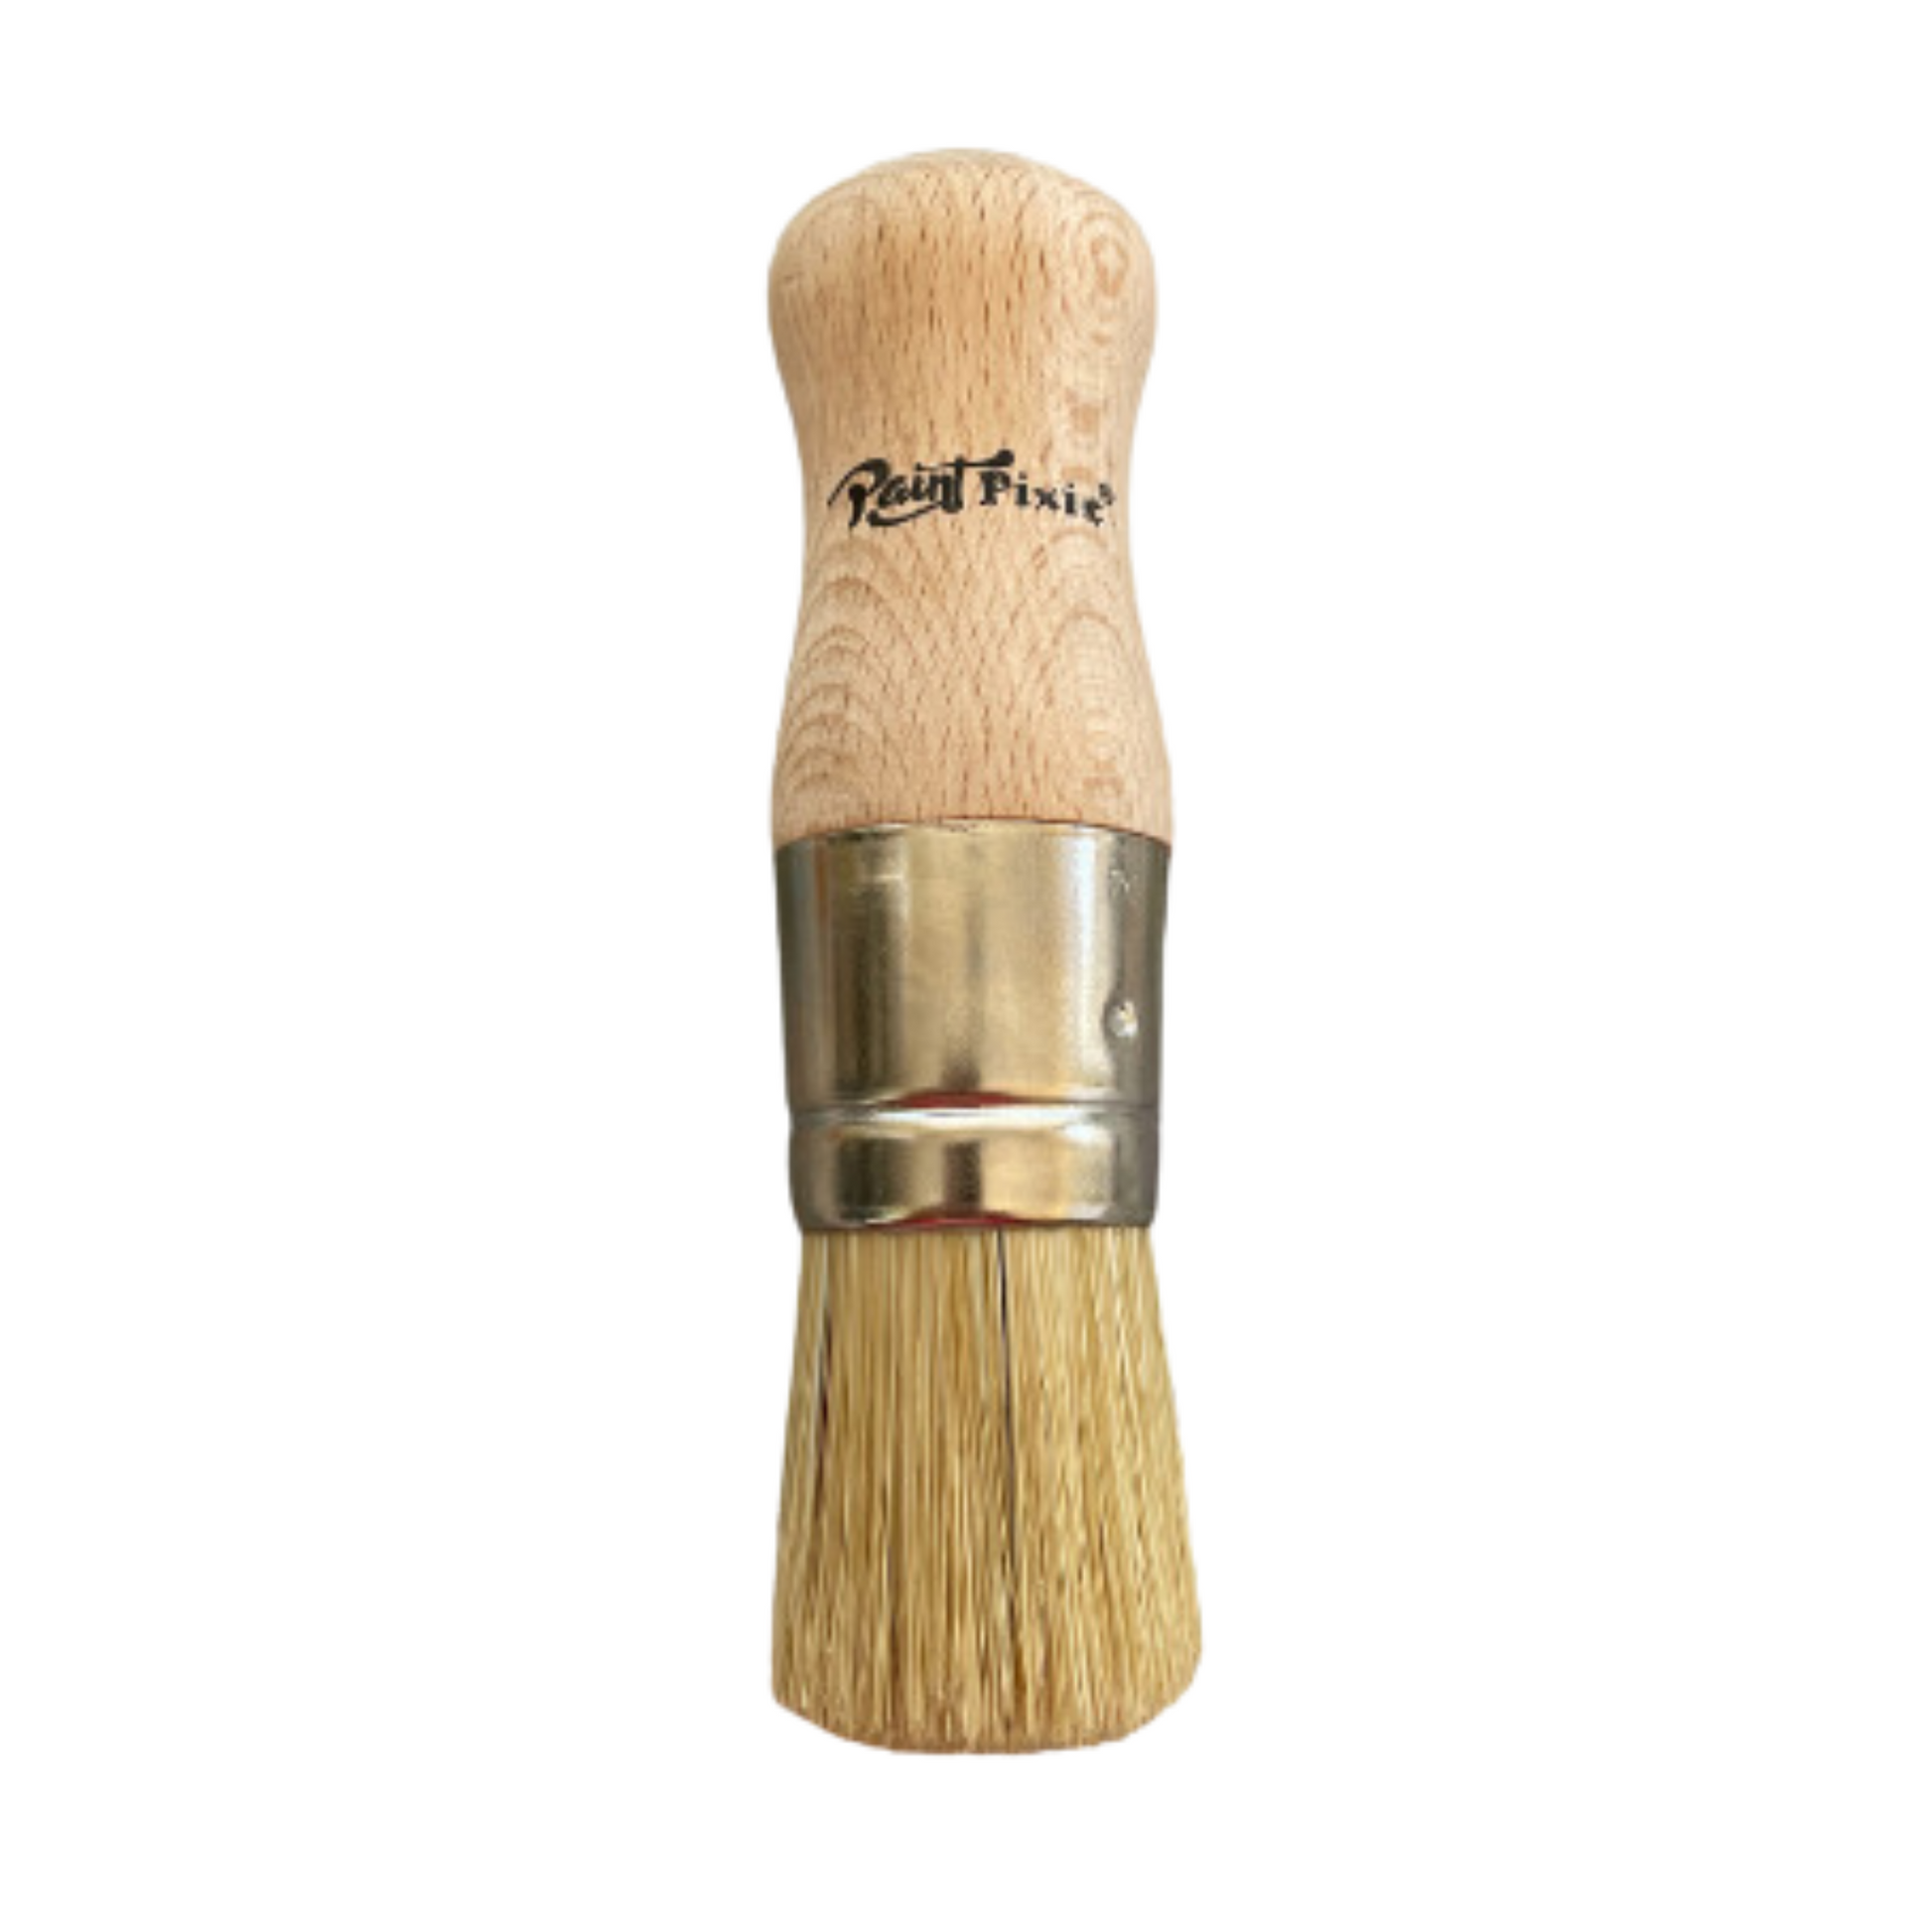 "Stipley" stencil and stippling brush by Paint Pixie. Available at Milton's Daughter.